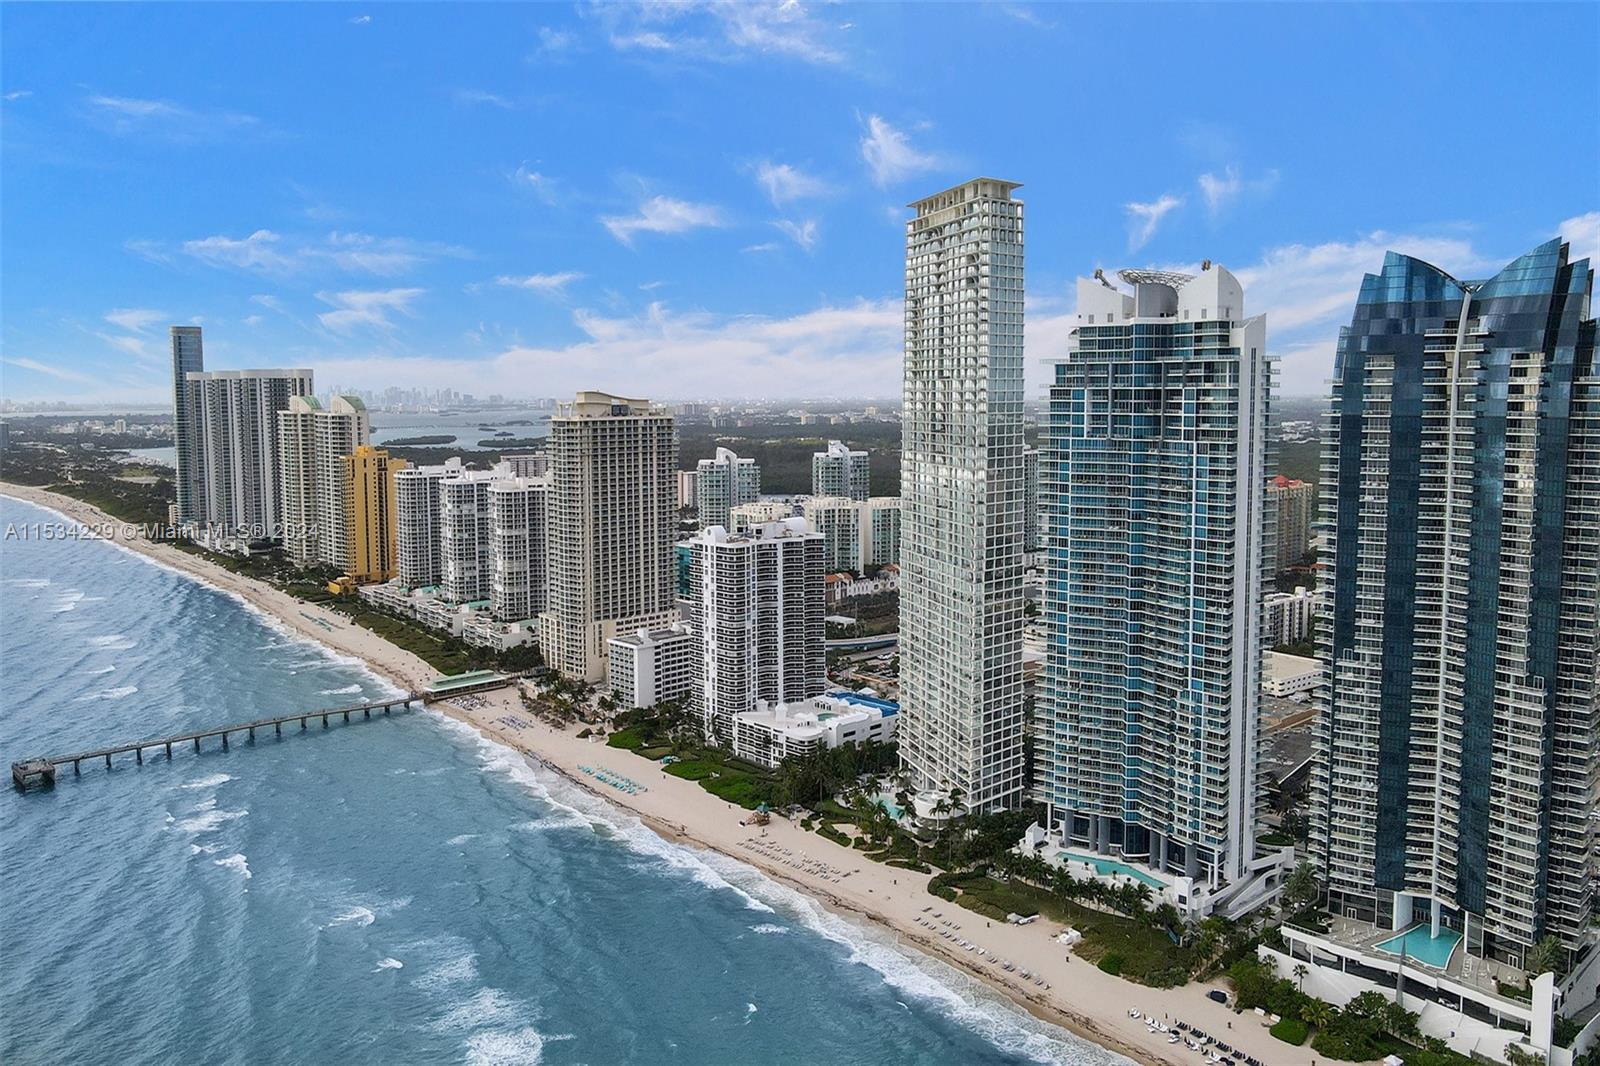 Photo of 16901 Collins Ave #3905 in Sunny Isles Beach, FL